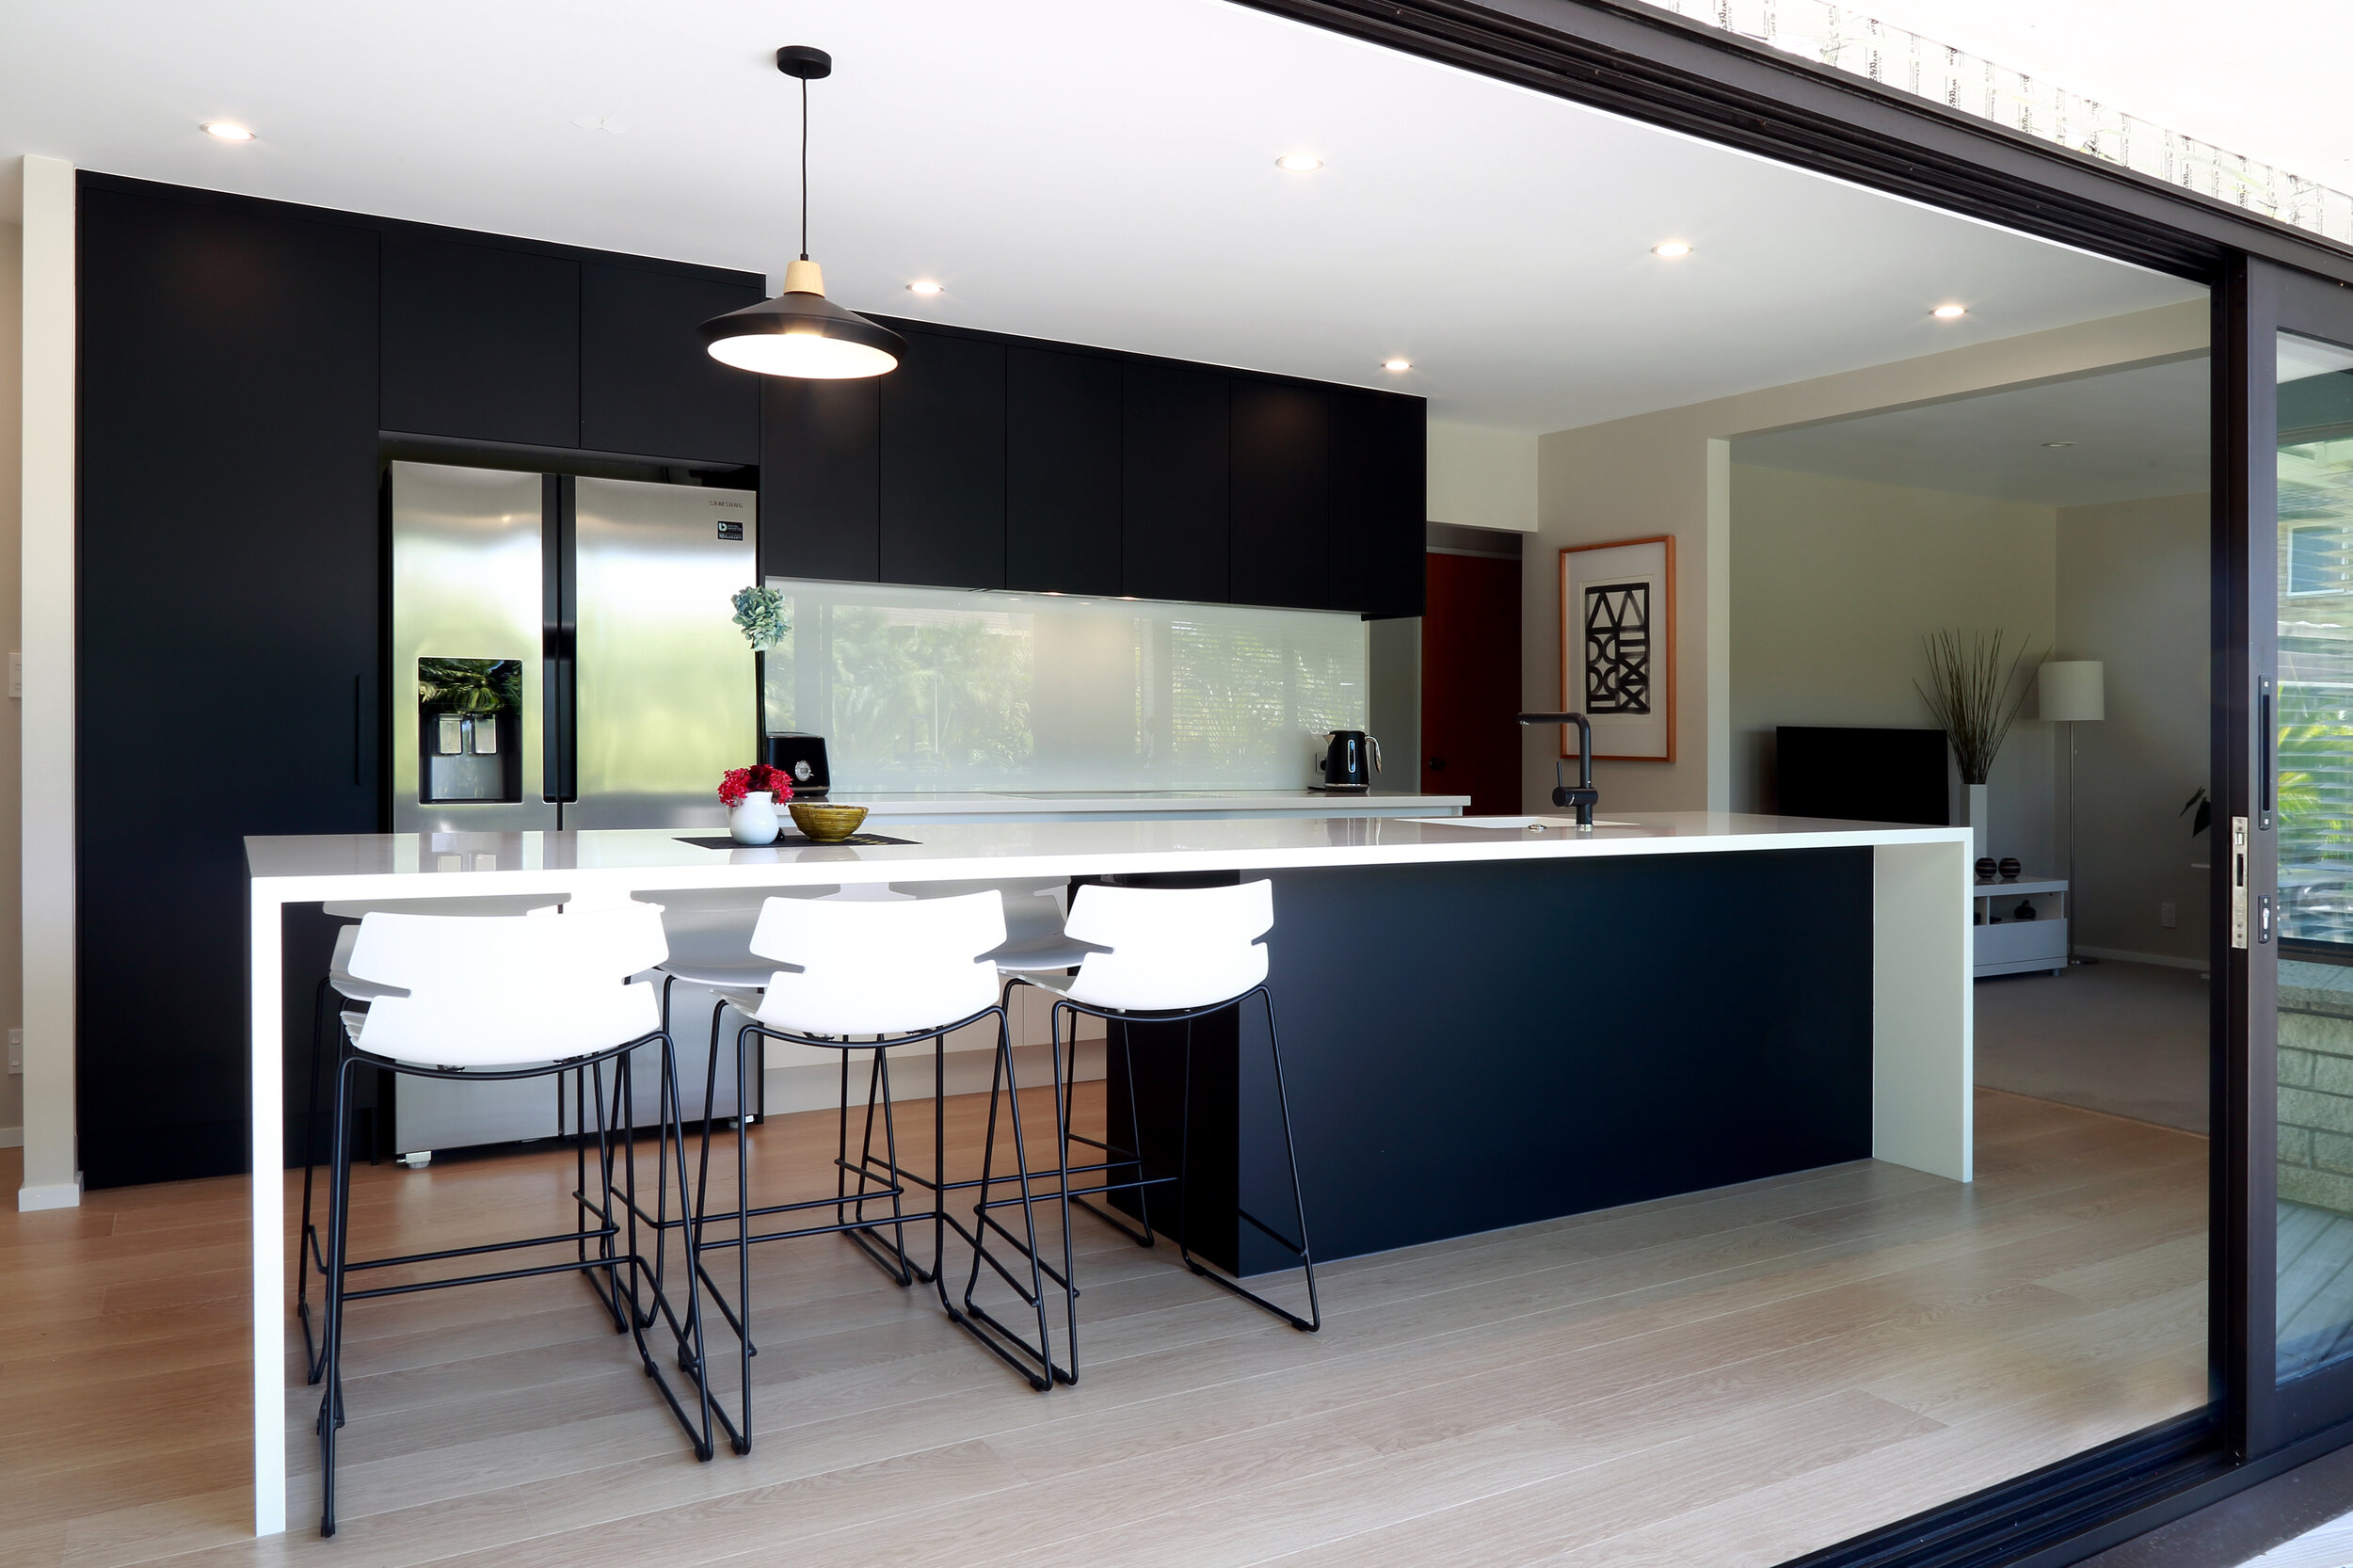 Galley kitchen with dark cabinetry and white backpainted glass splashback